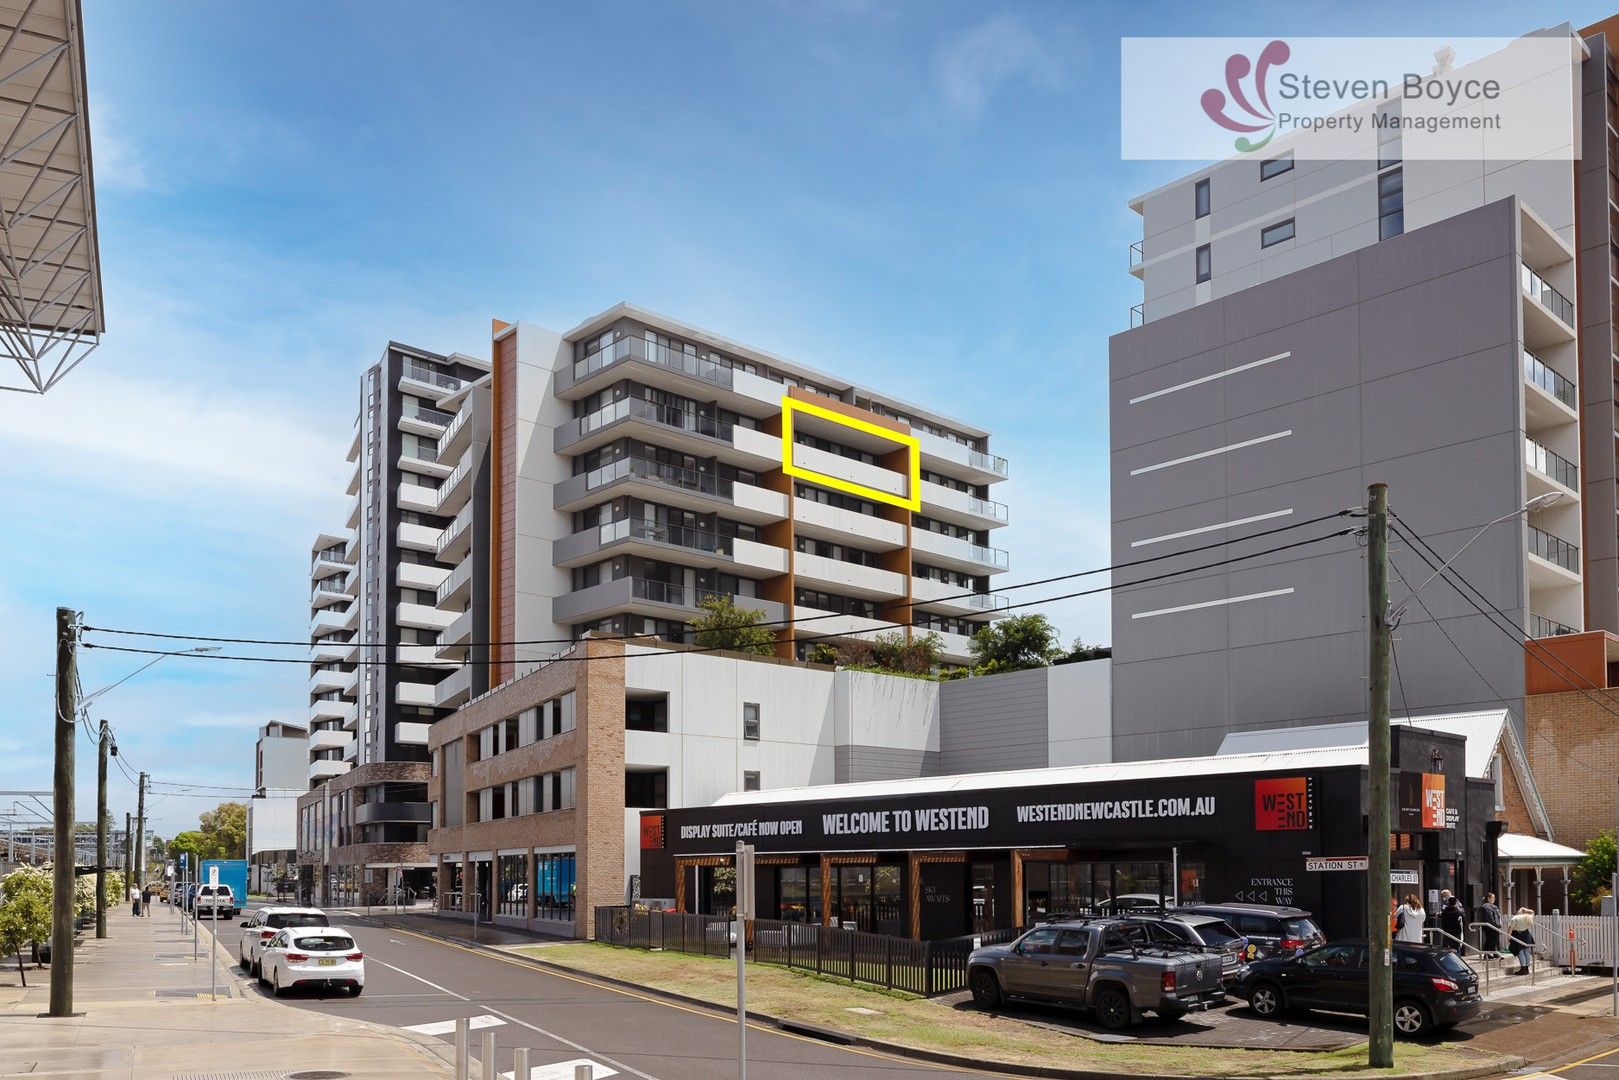 2 bedrooms Apartment / Unit / Flat in 806/9 Station Street WICKHAM NSW, 2293